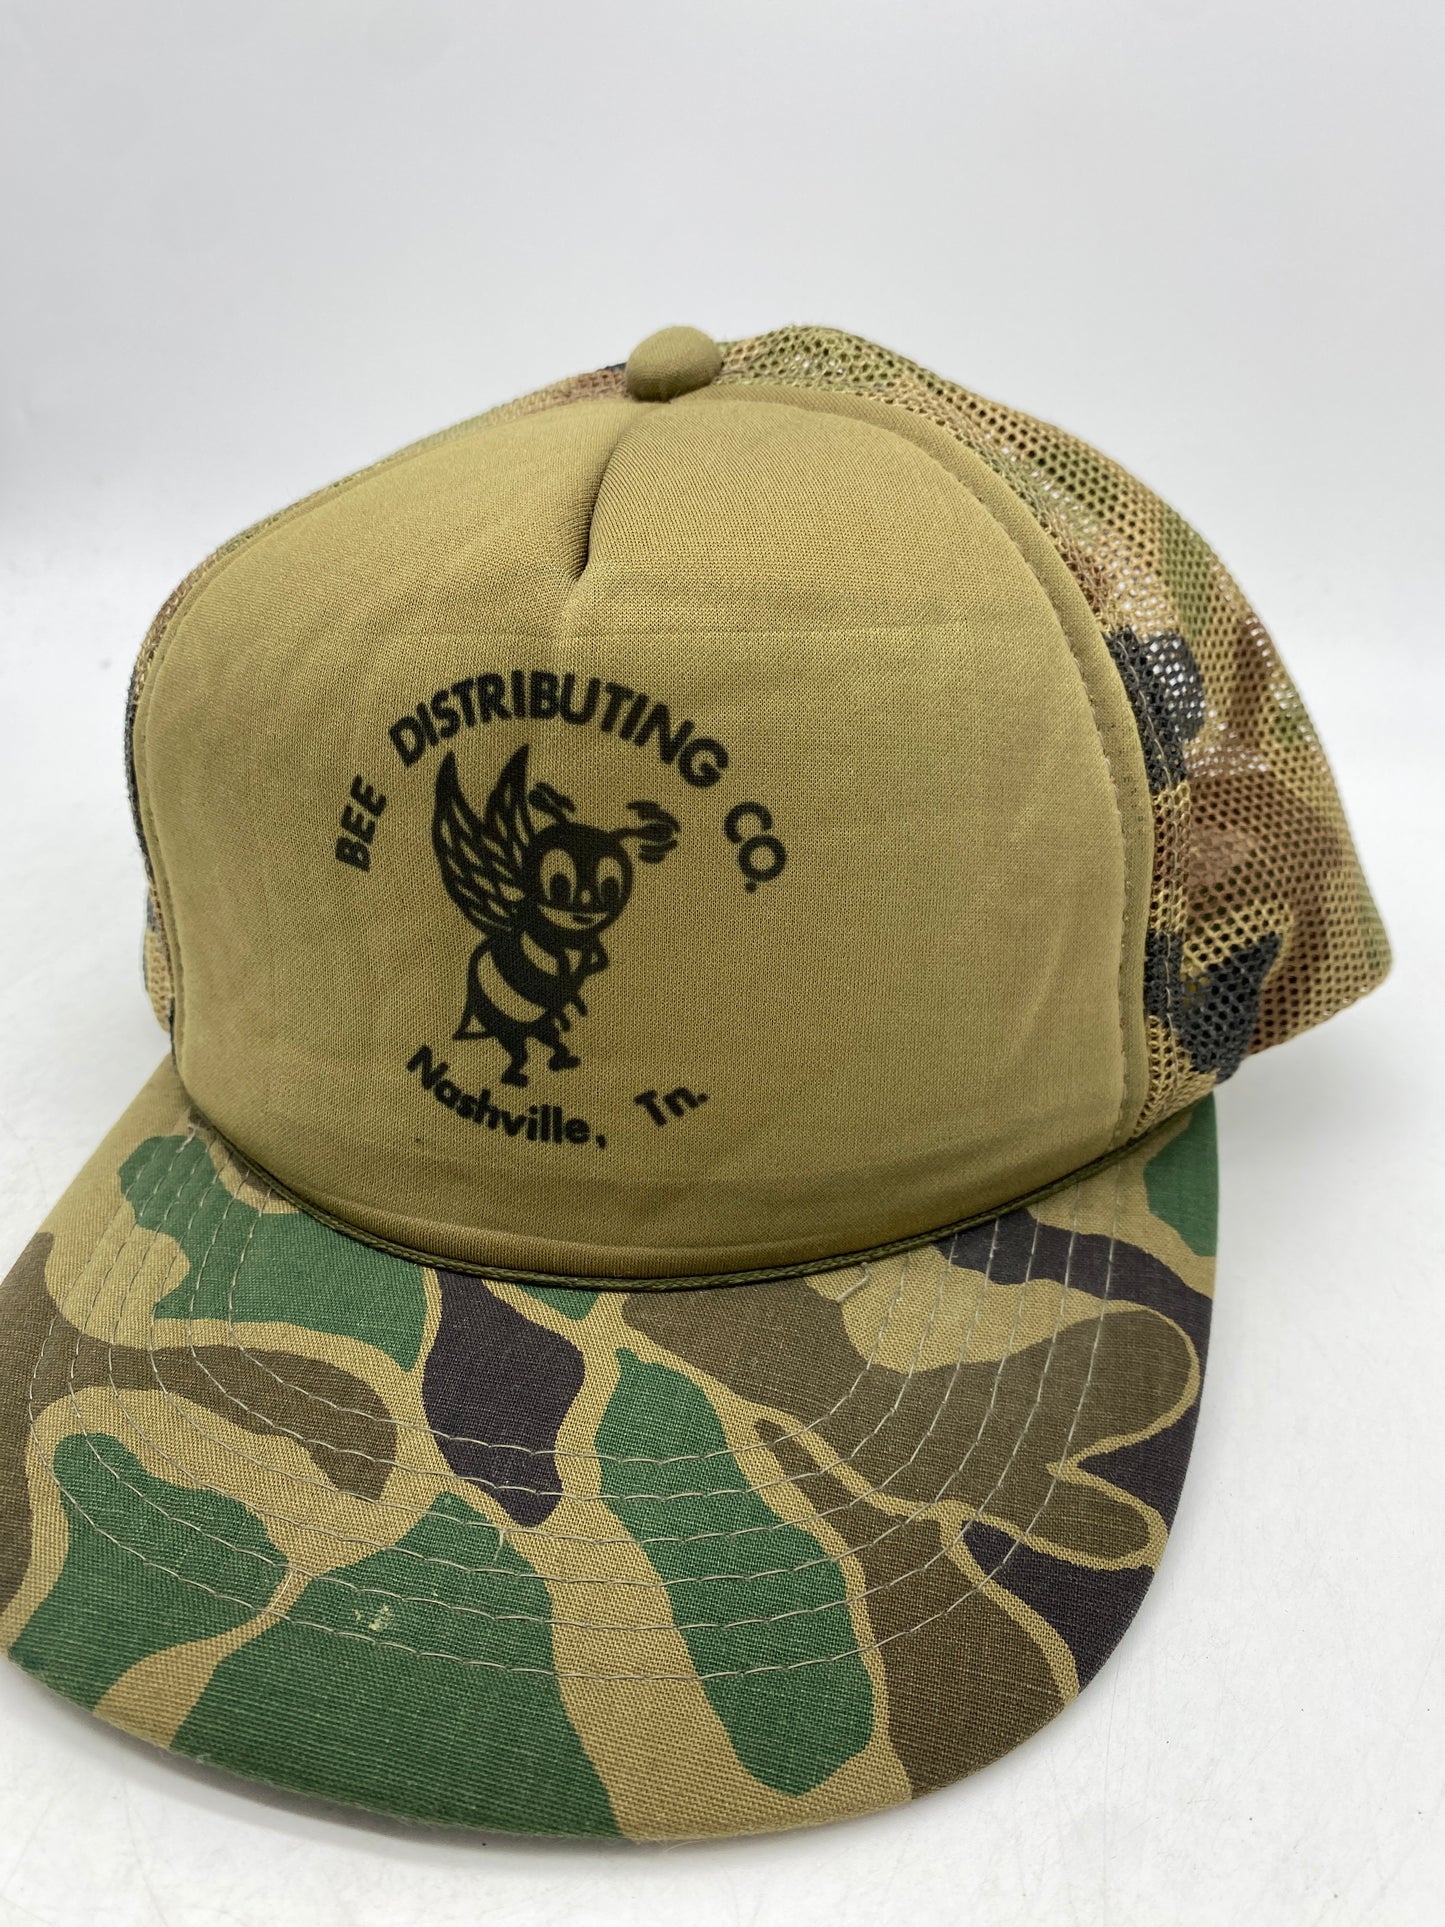 Load image into Gallery viewer, VTG Bee Distributing Co. Trucker Hat
